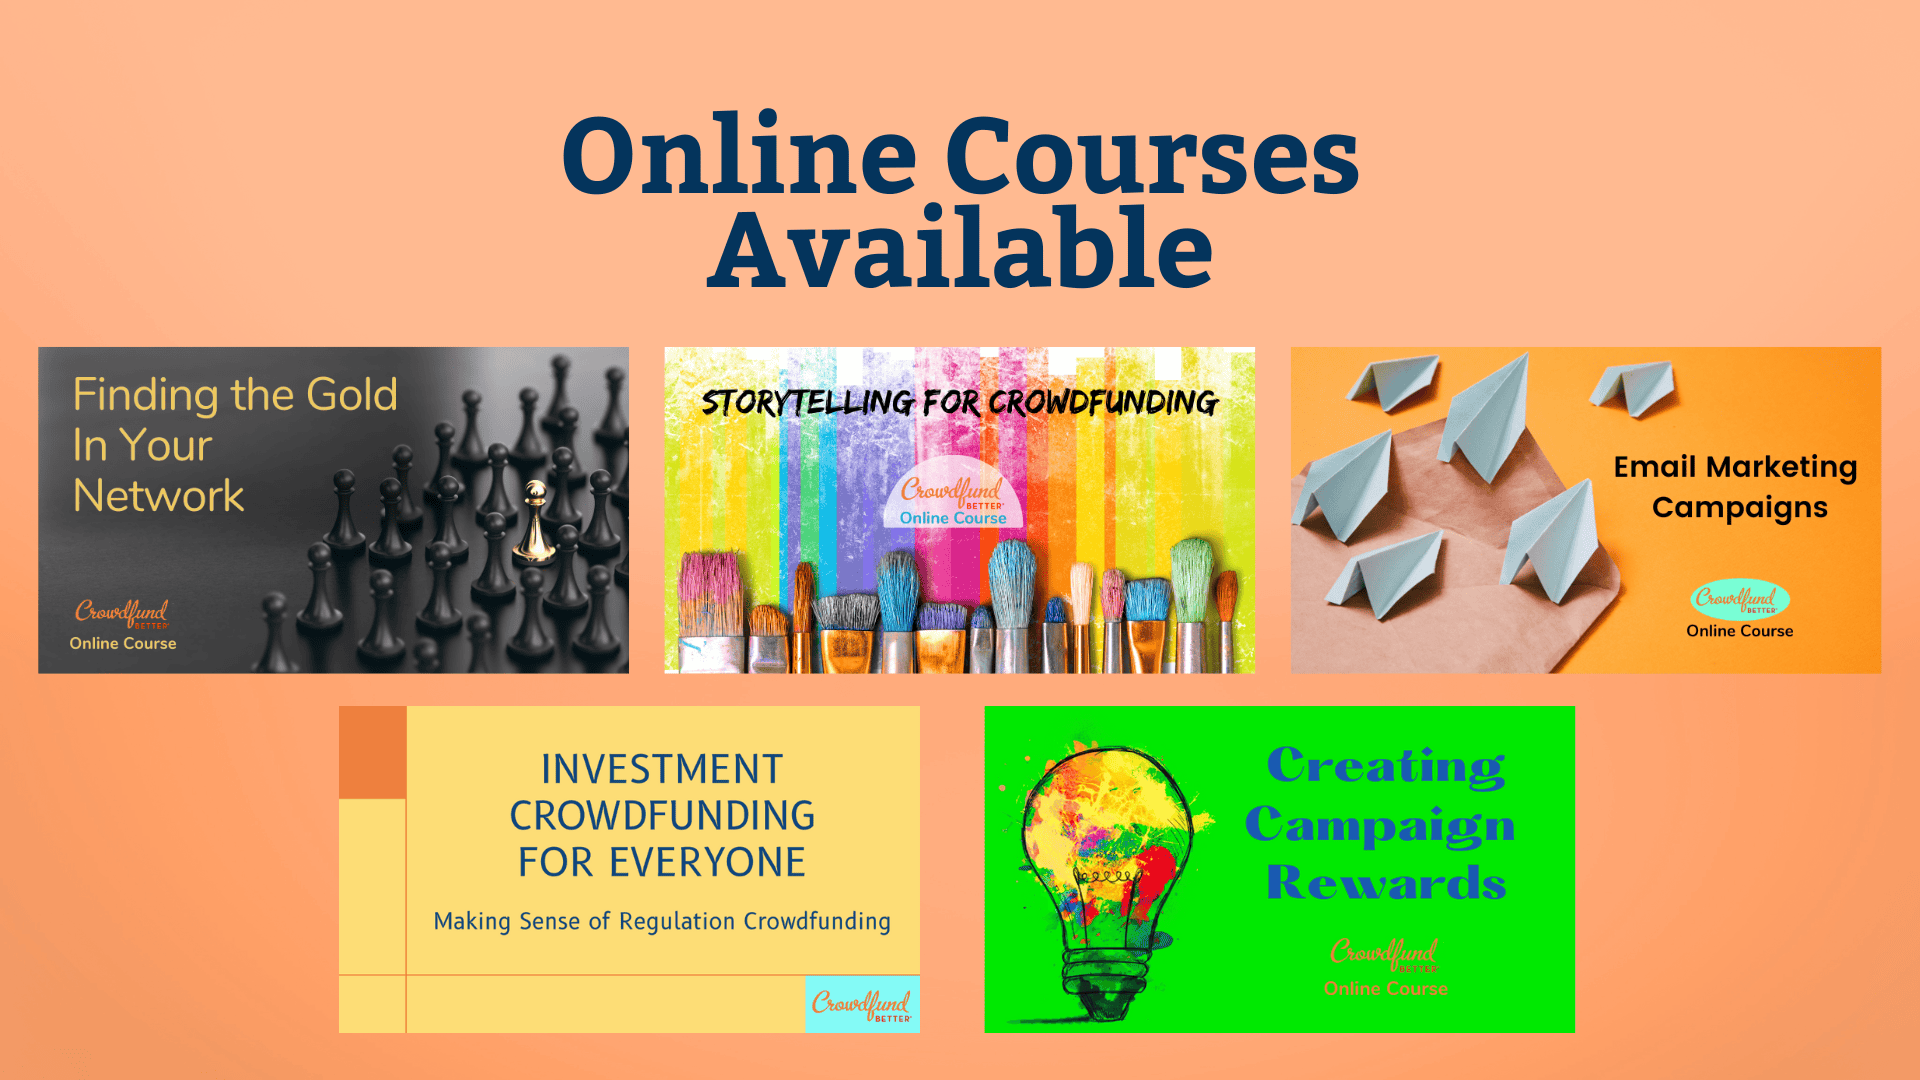 Crowdfund Better online courses, Finding the Gold in Your Network, Storytelling for Crowdfunding, Email Marketing Campaigns, Investment Crowdfunding for Everyone, Creating Campaign Rewards, crowdfunding courses, online courses, crowdfunding for business, crowdfunding education